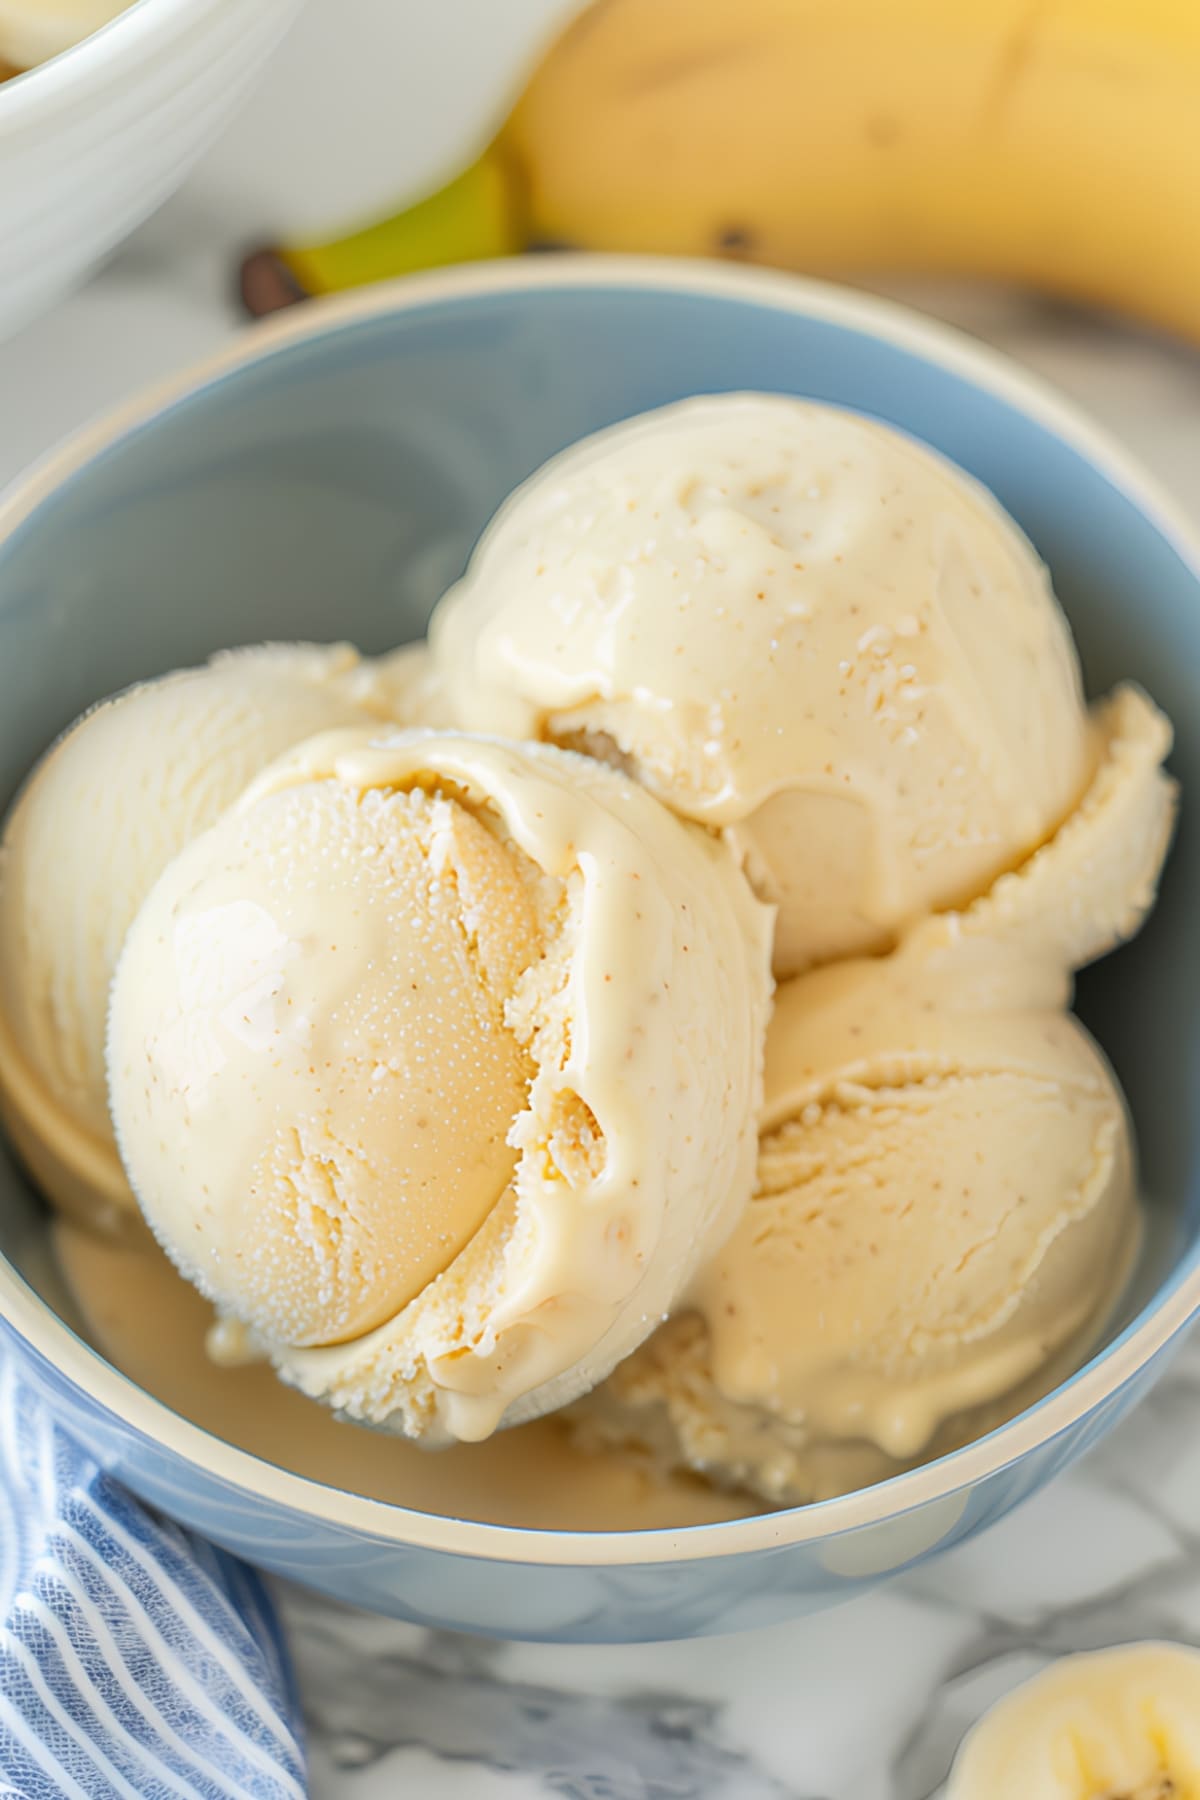 One-ingredient homemade banana ice cream in a bowl